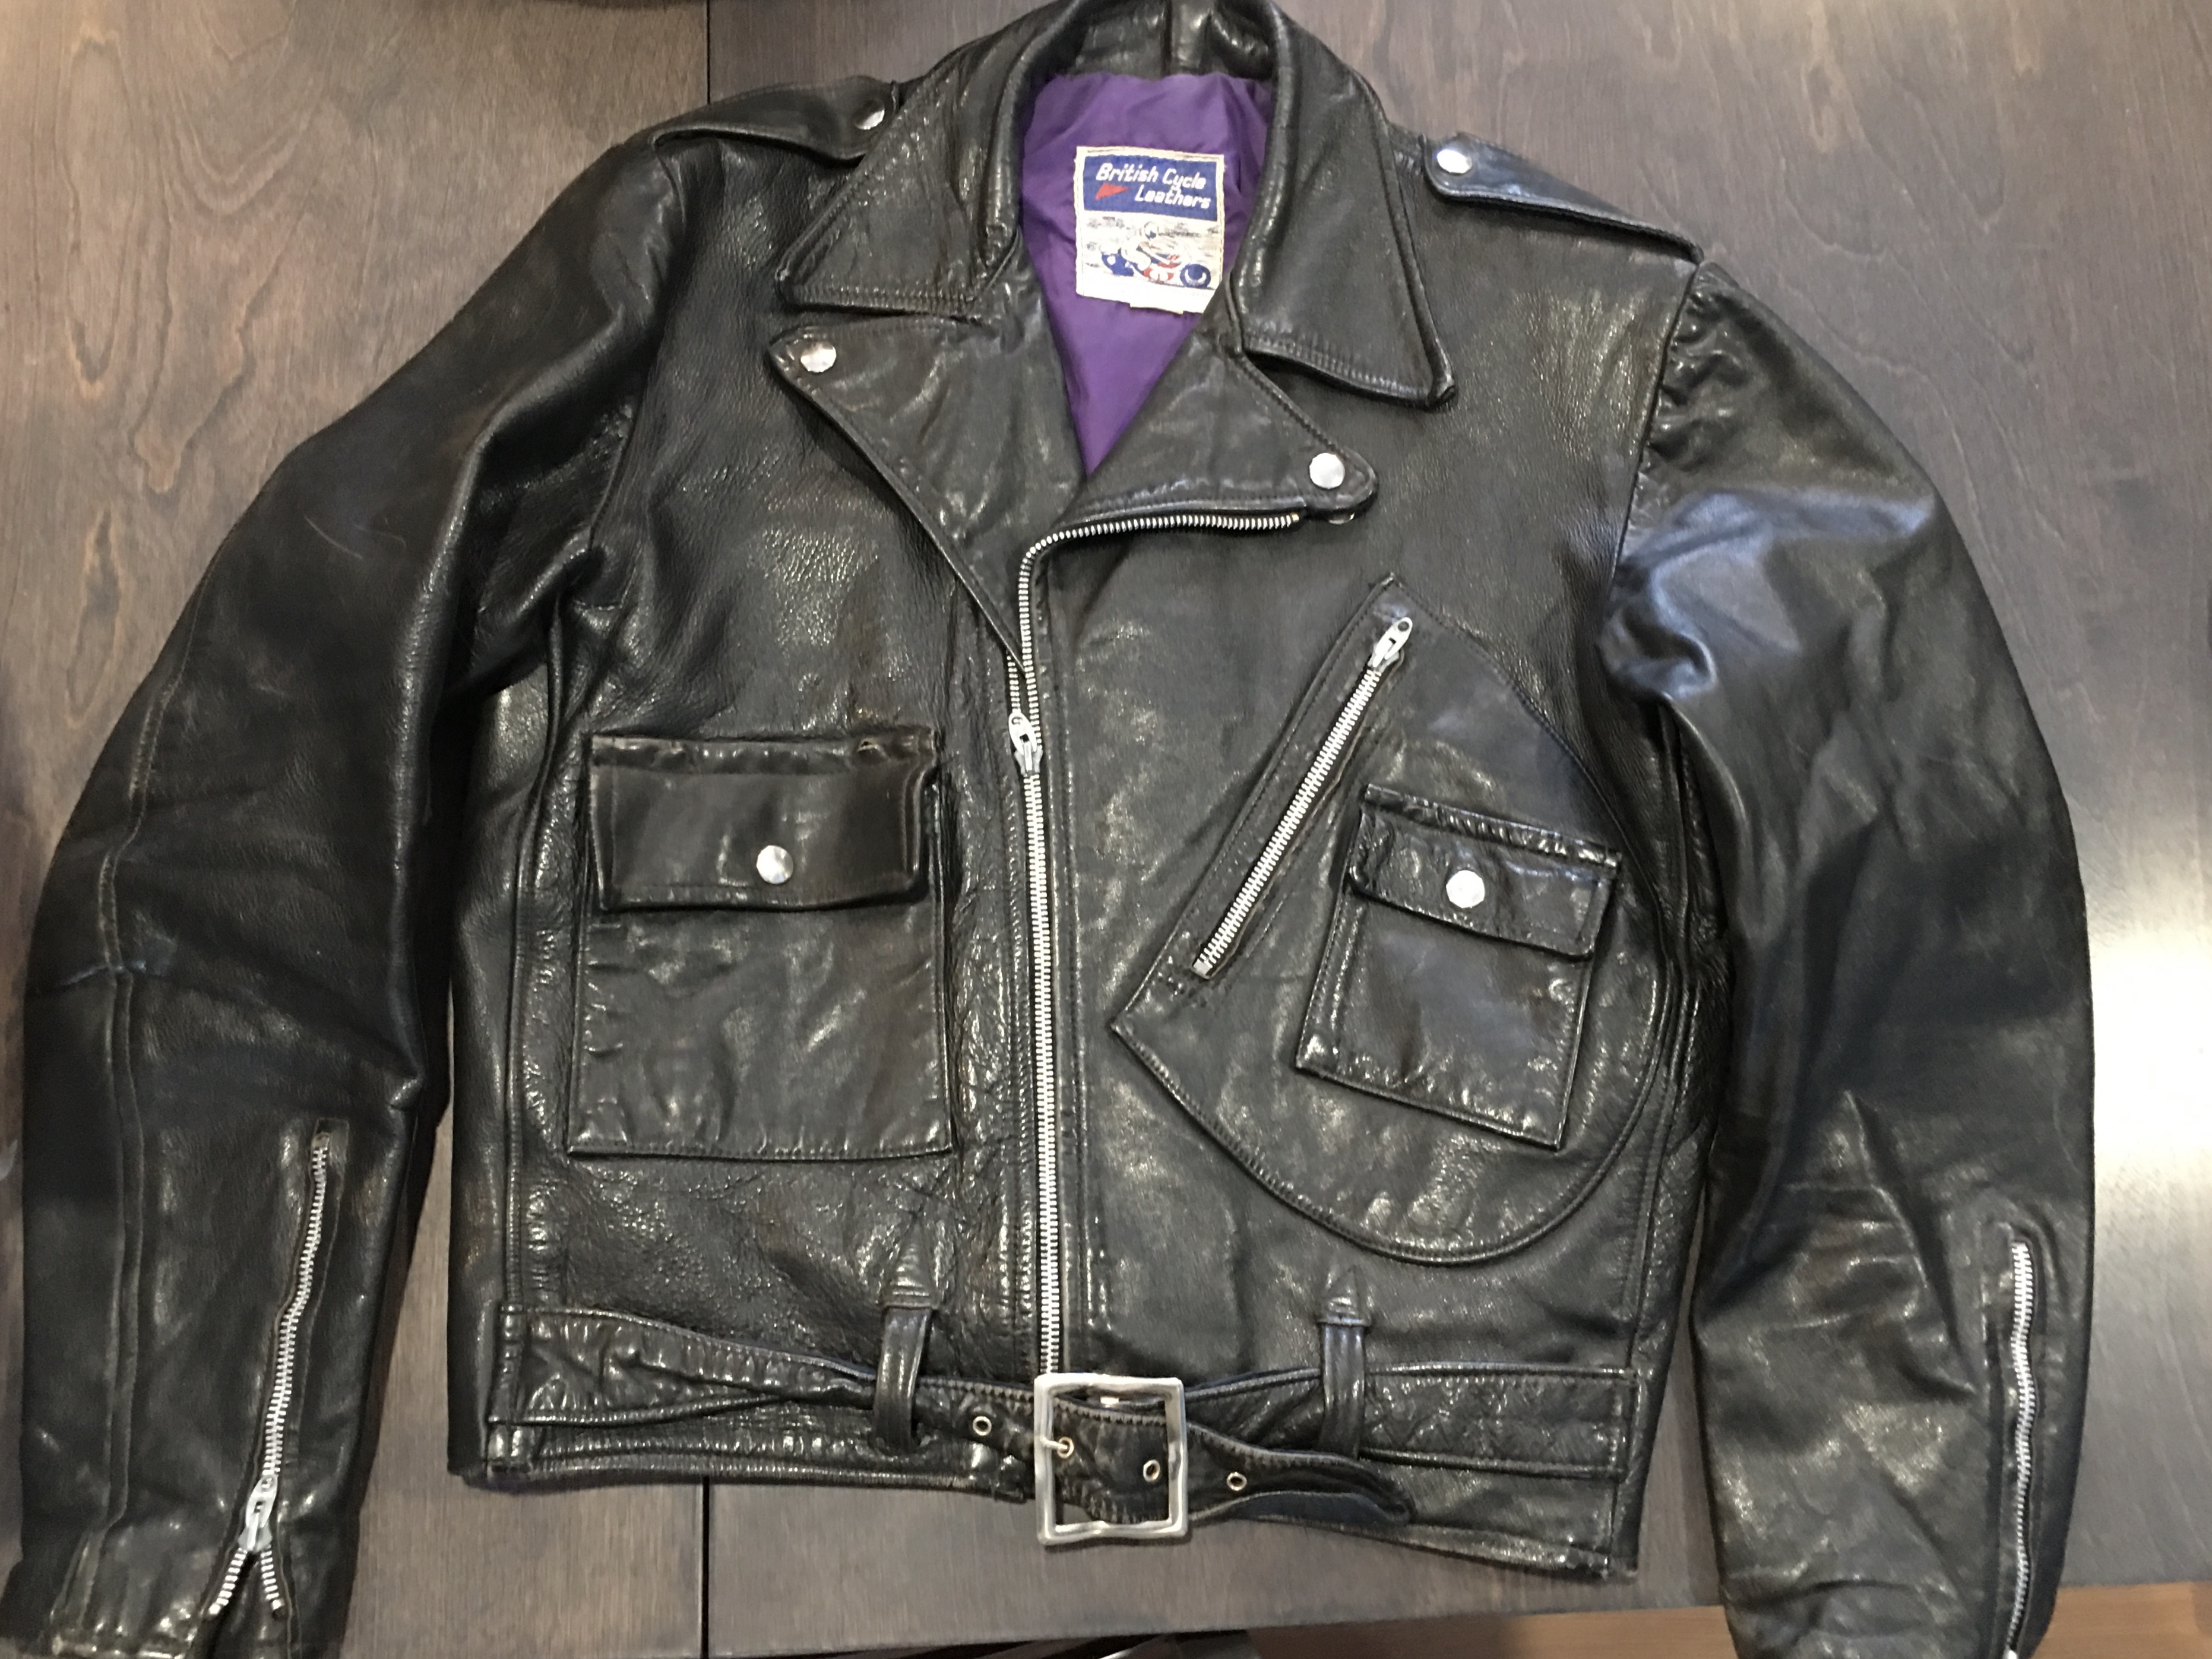 Where to buy Leather Jackets | Page 2 | Vintage Leather Jackets Forum